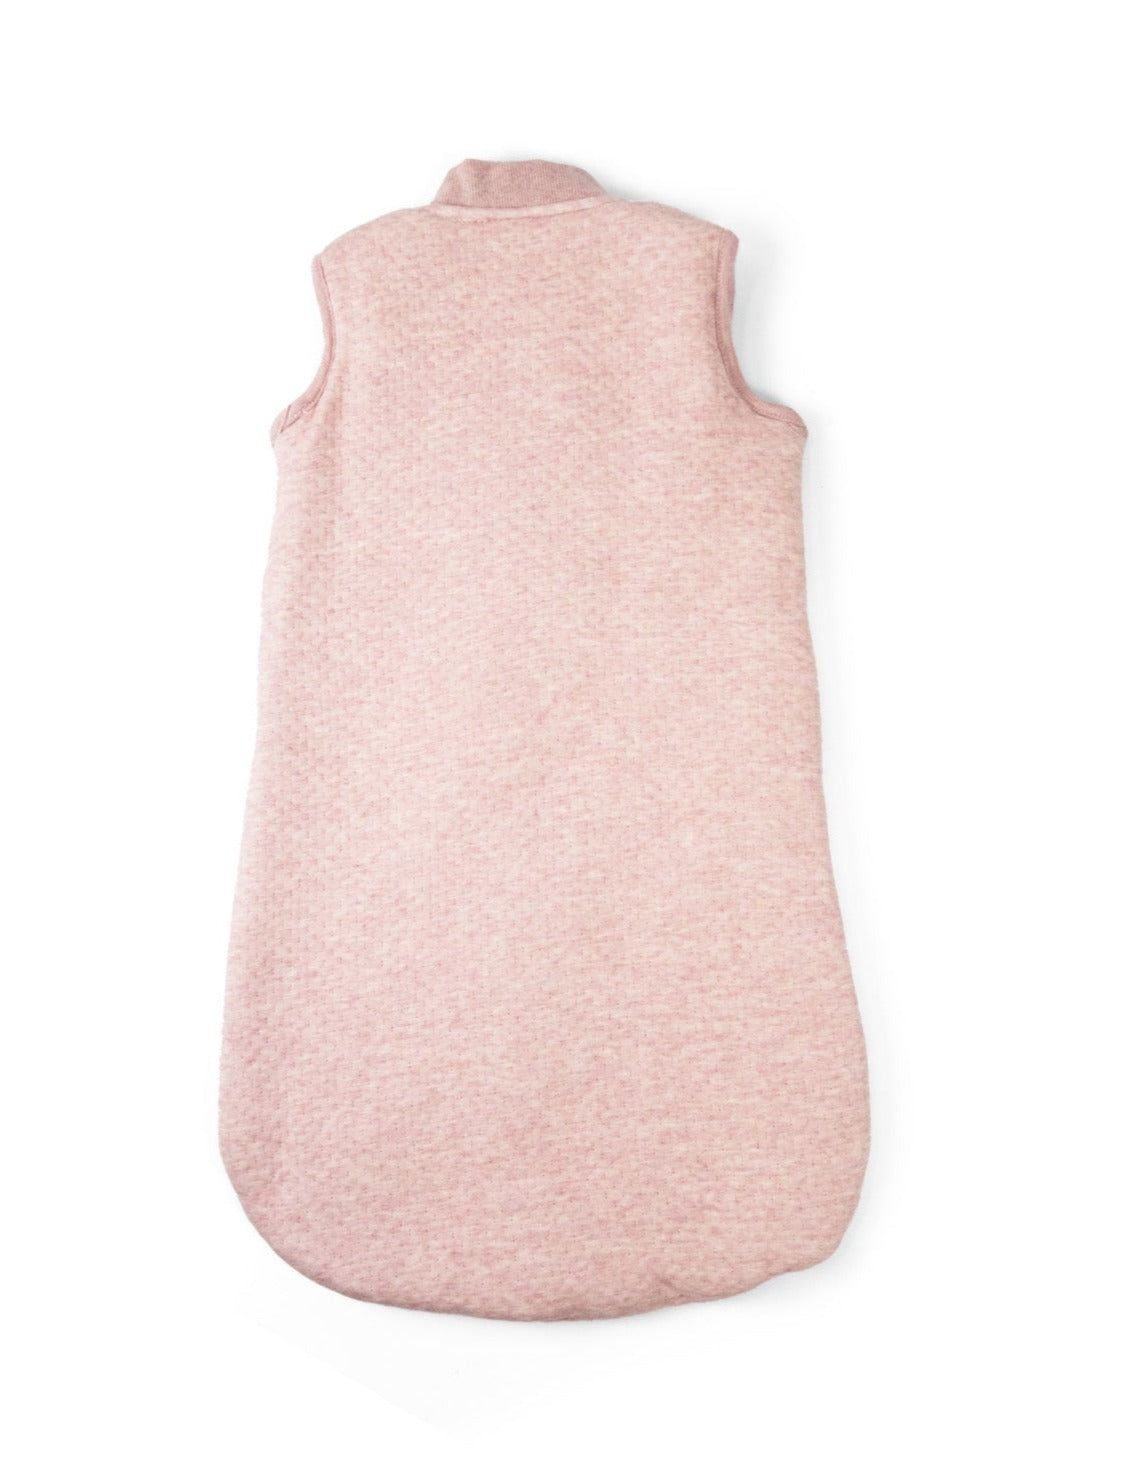 Sleeping Bag cotton no arms 2.5 TOG Dusty Pink - all sizes